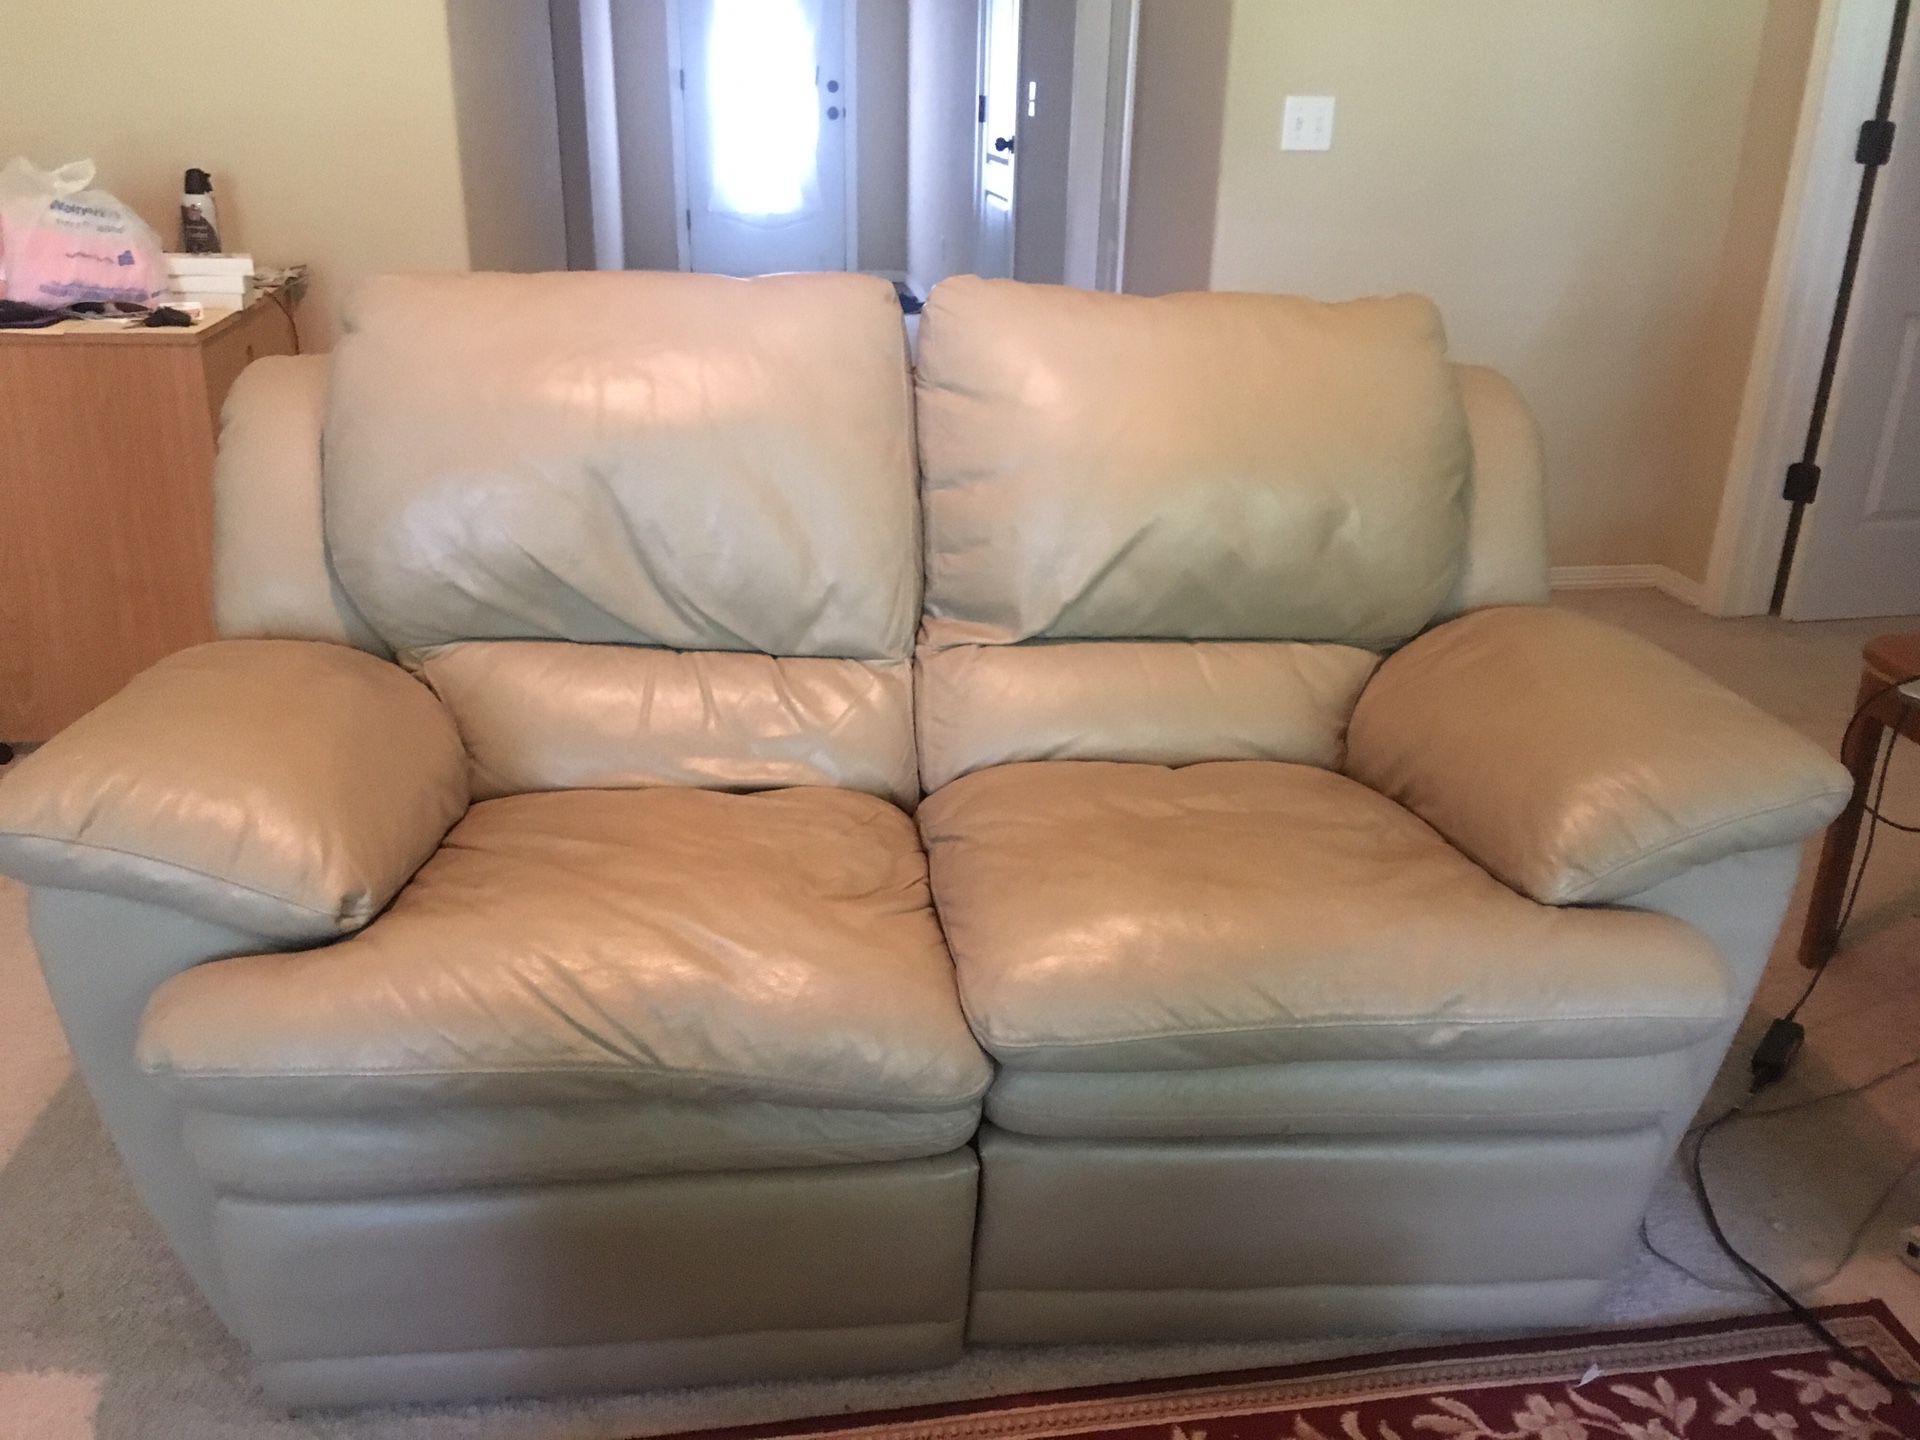 Italian leather reclining sofa and loveseat, coffee table 2 end tables with lamps and a area rug.